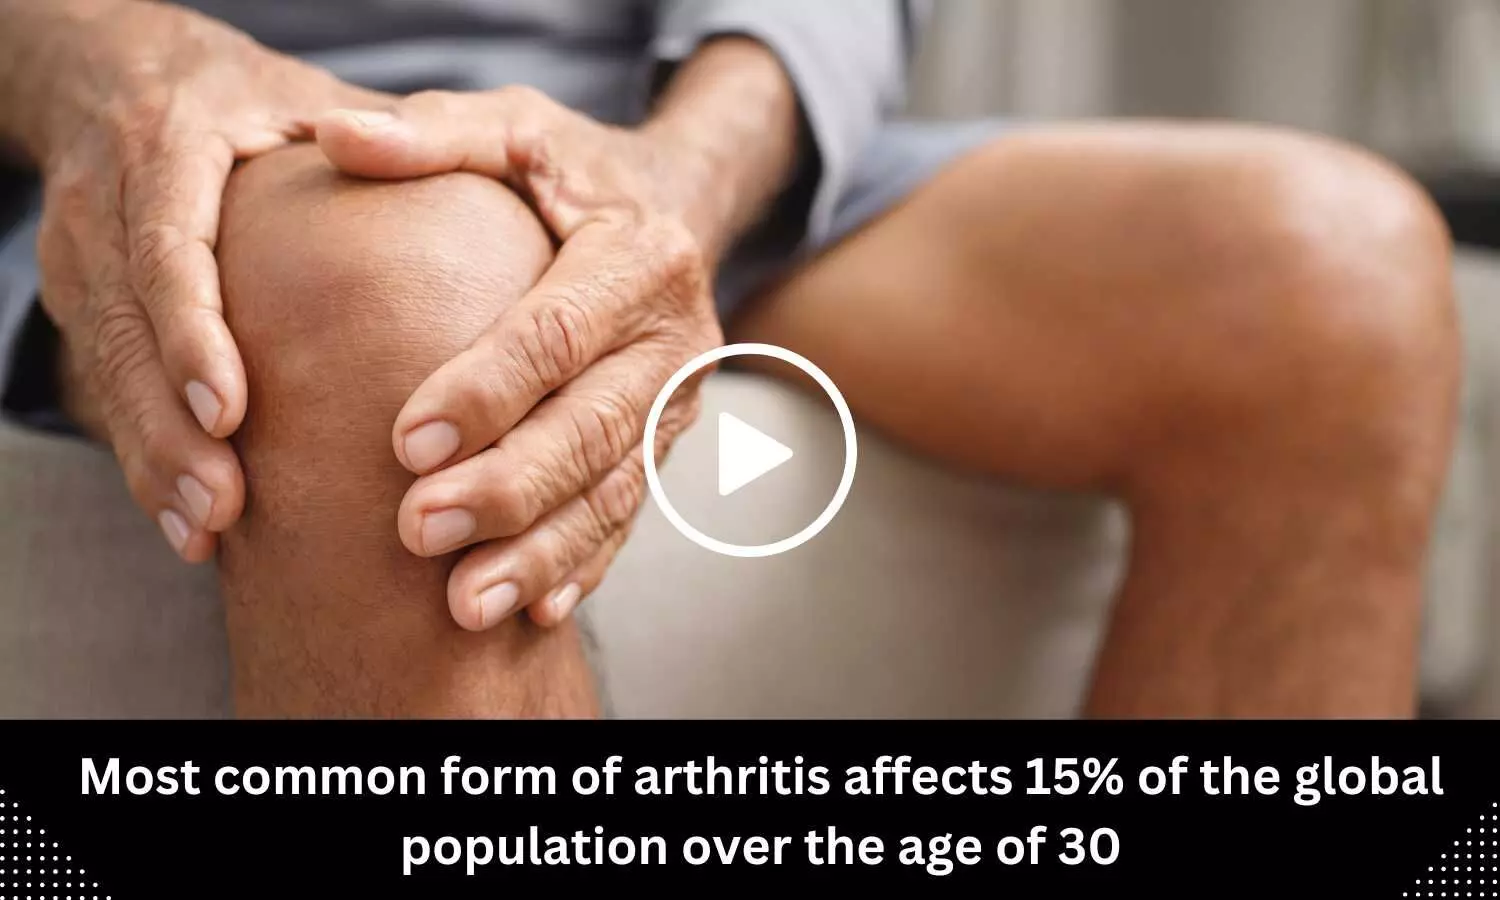 Most common form of arthritis affects 15% of the global population over the age of 30